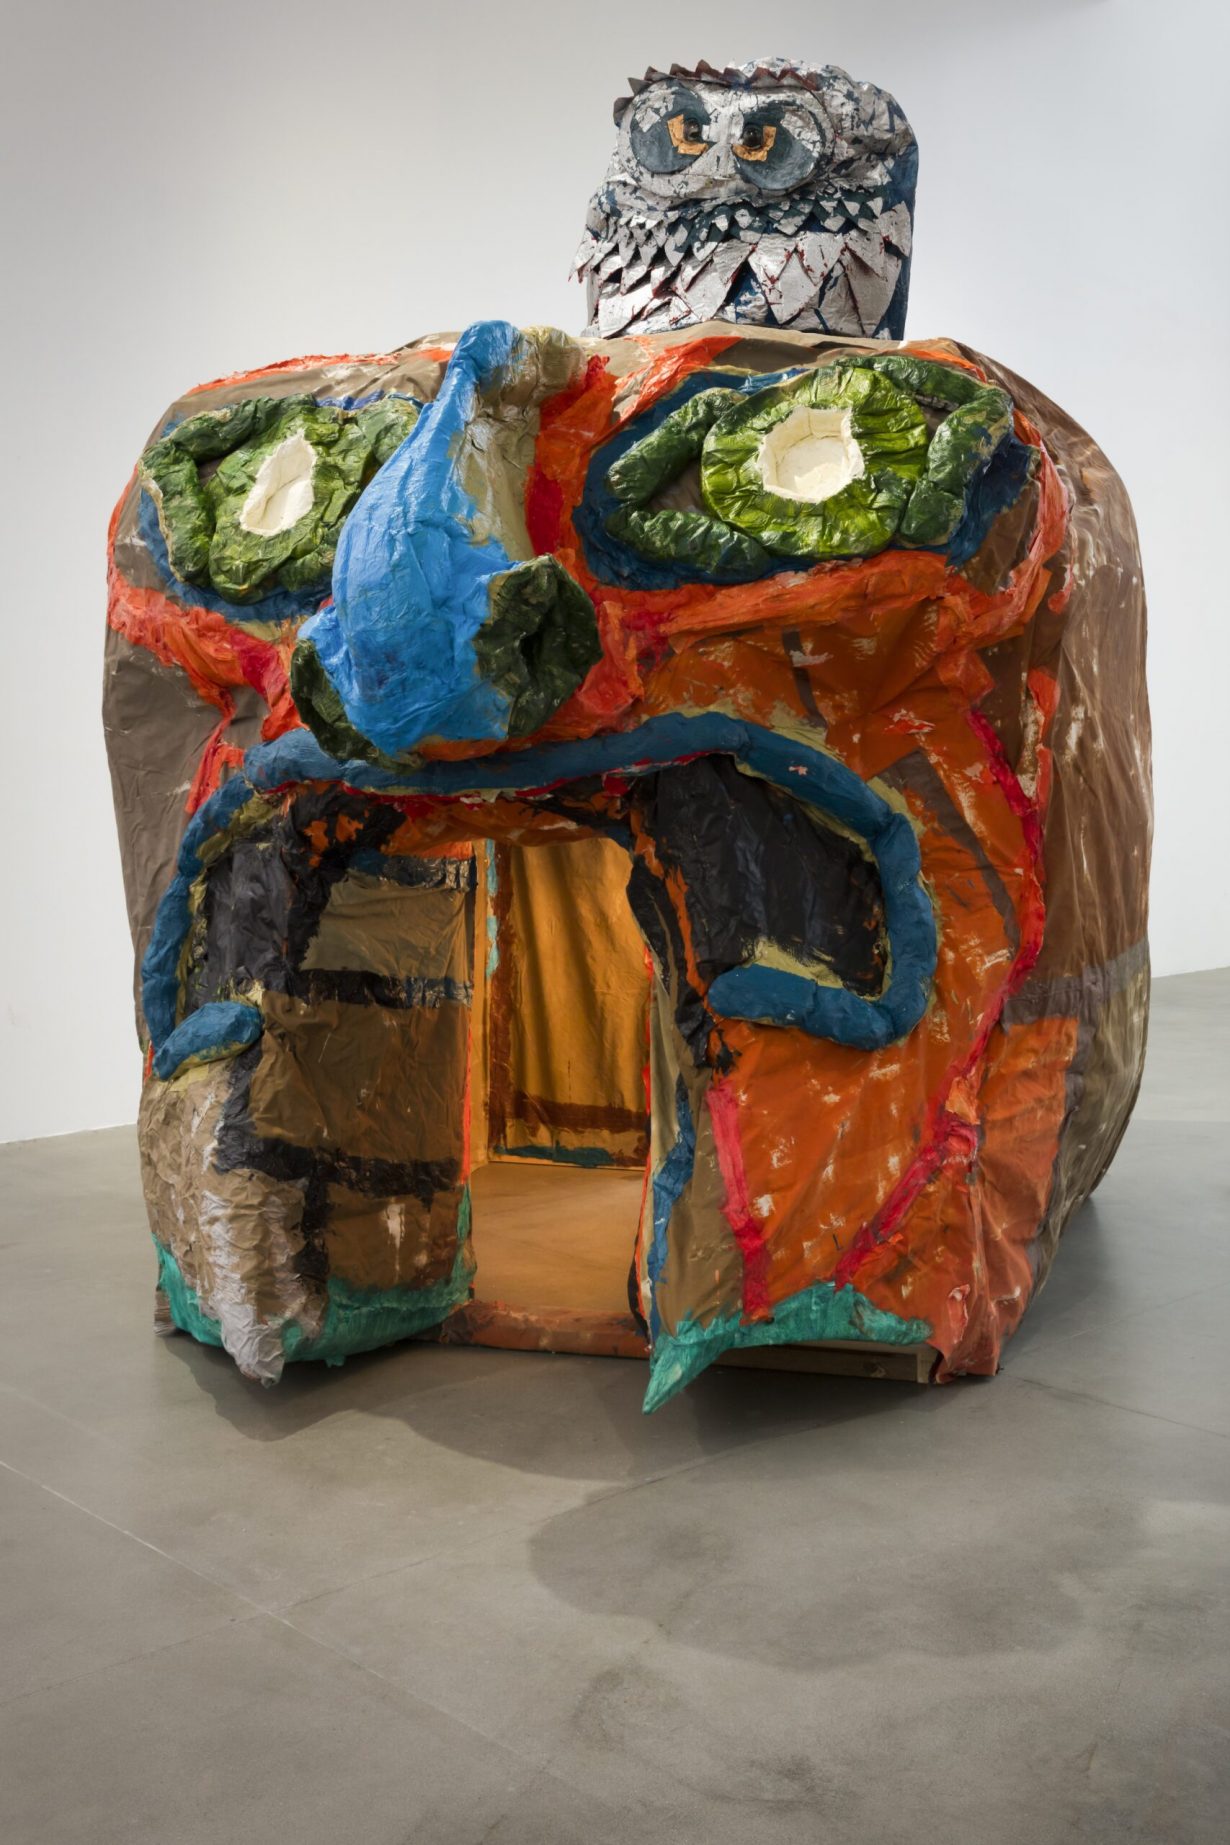 Monster Chetwynd, Il Tetto, 2017, wood, papier-mache, exhibition view, Monster Chetwynd, The Owl with the Laser Eyes, Fondazione Sandretto Re Rebaudengo, 2018